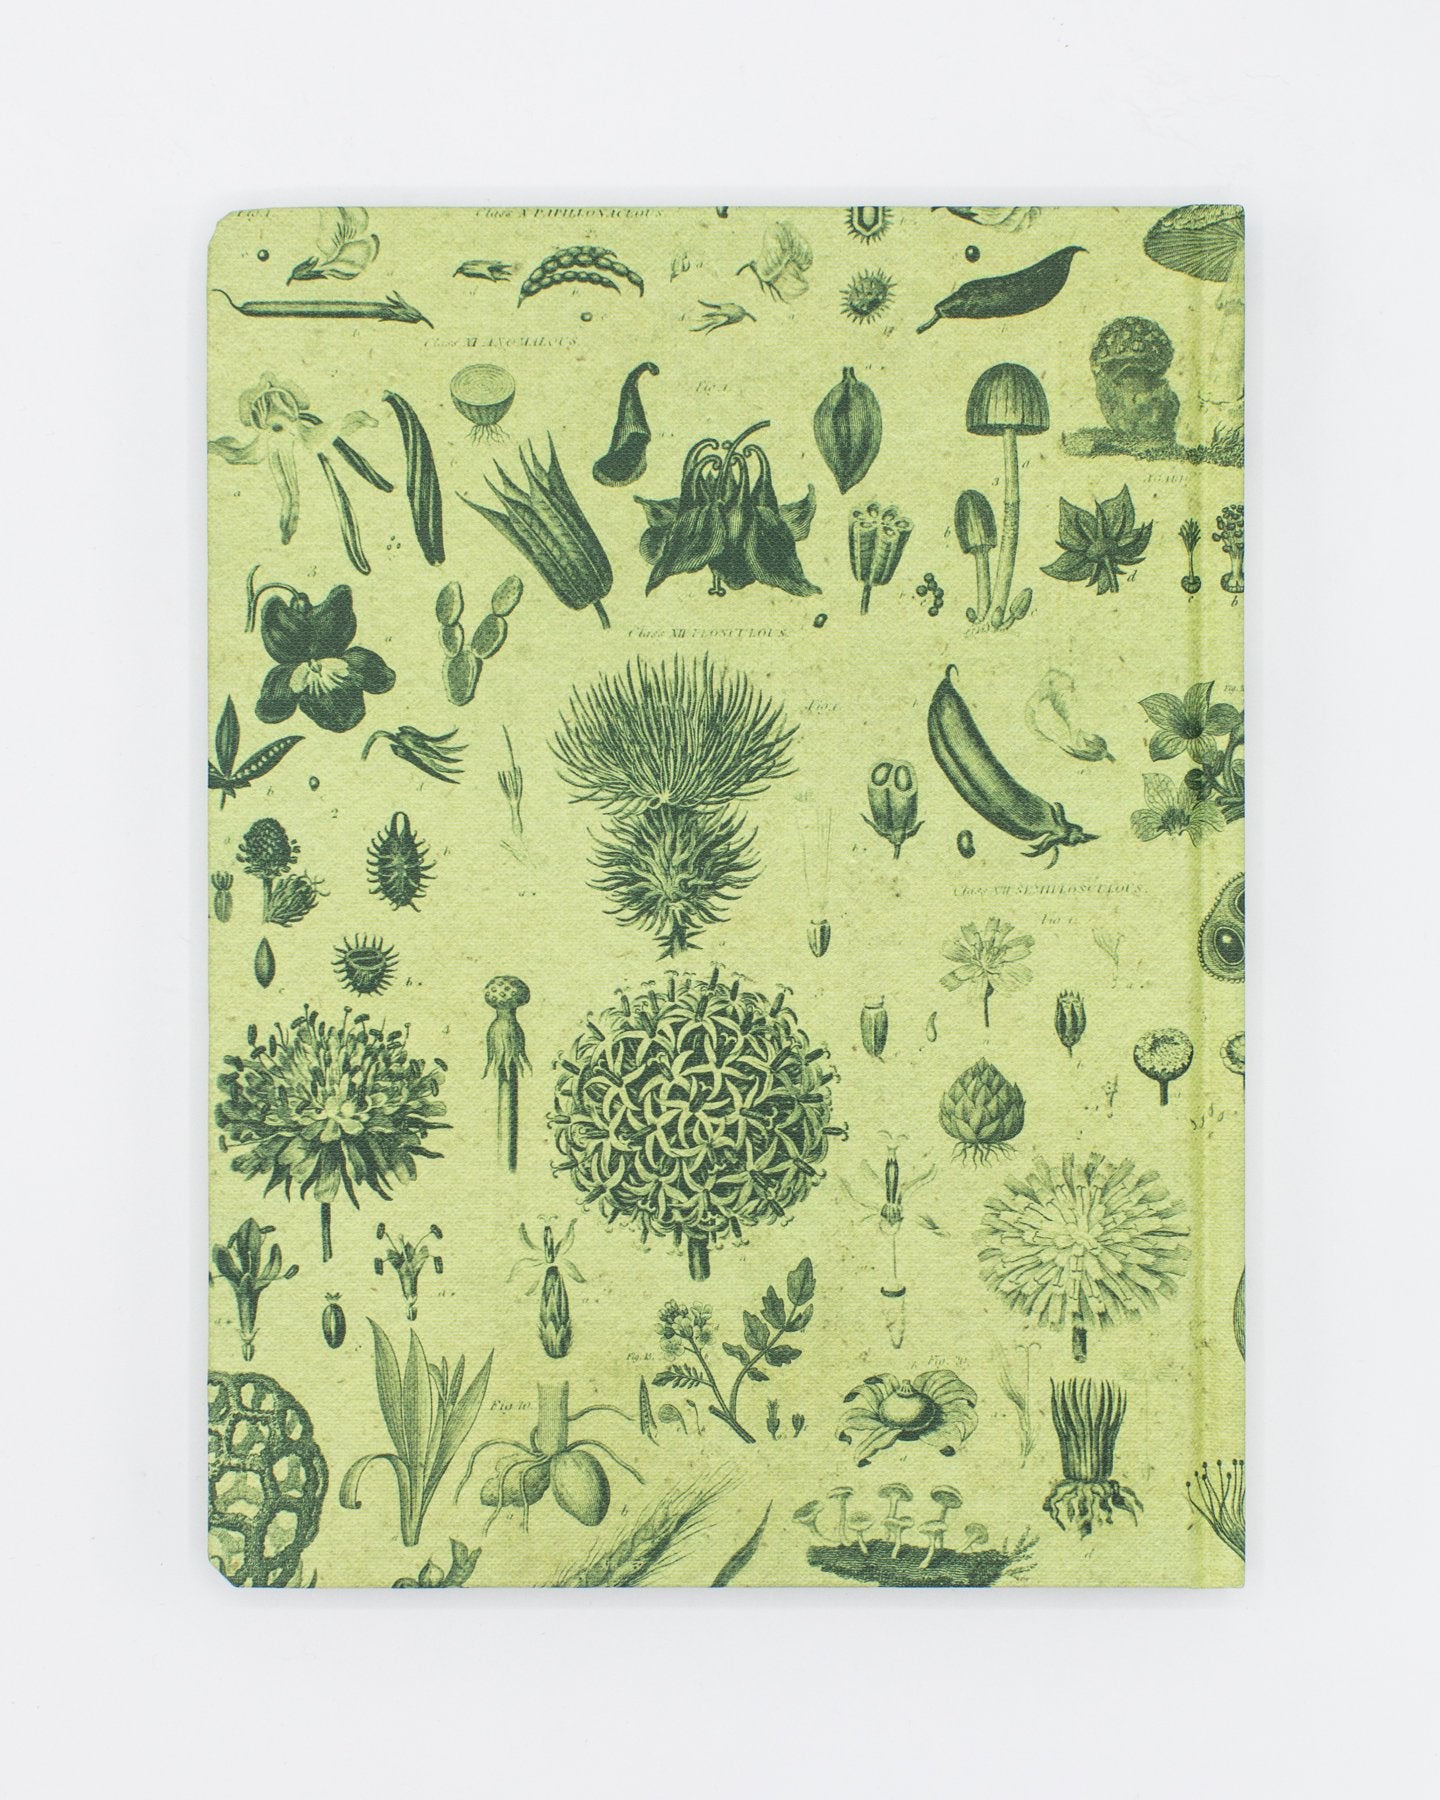 Plants & Fungi Hardcover Notebook - Lined/Grid